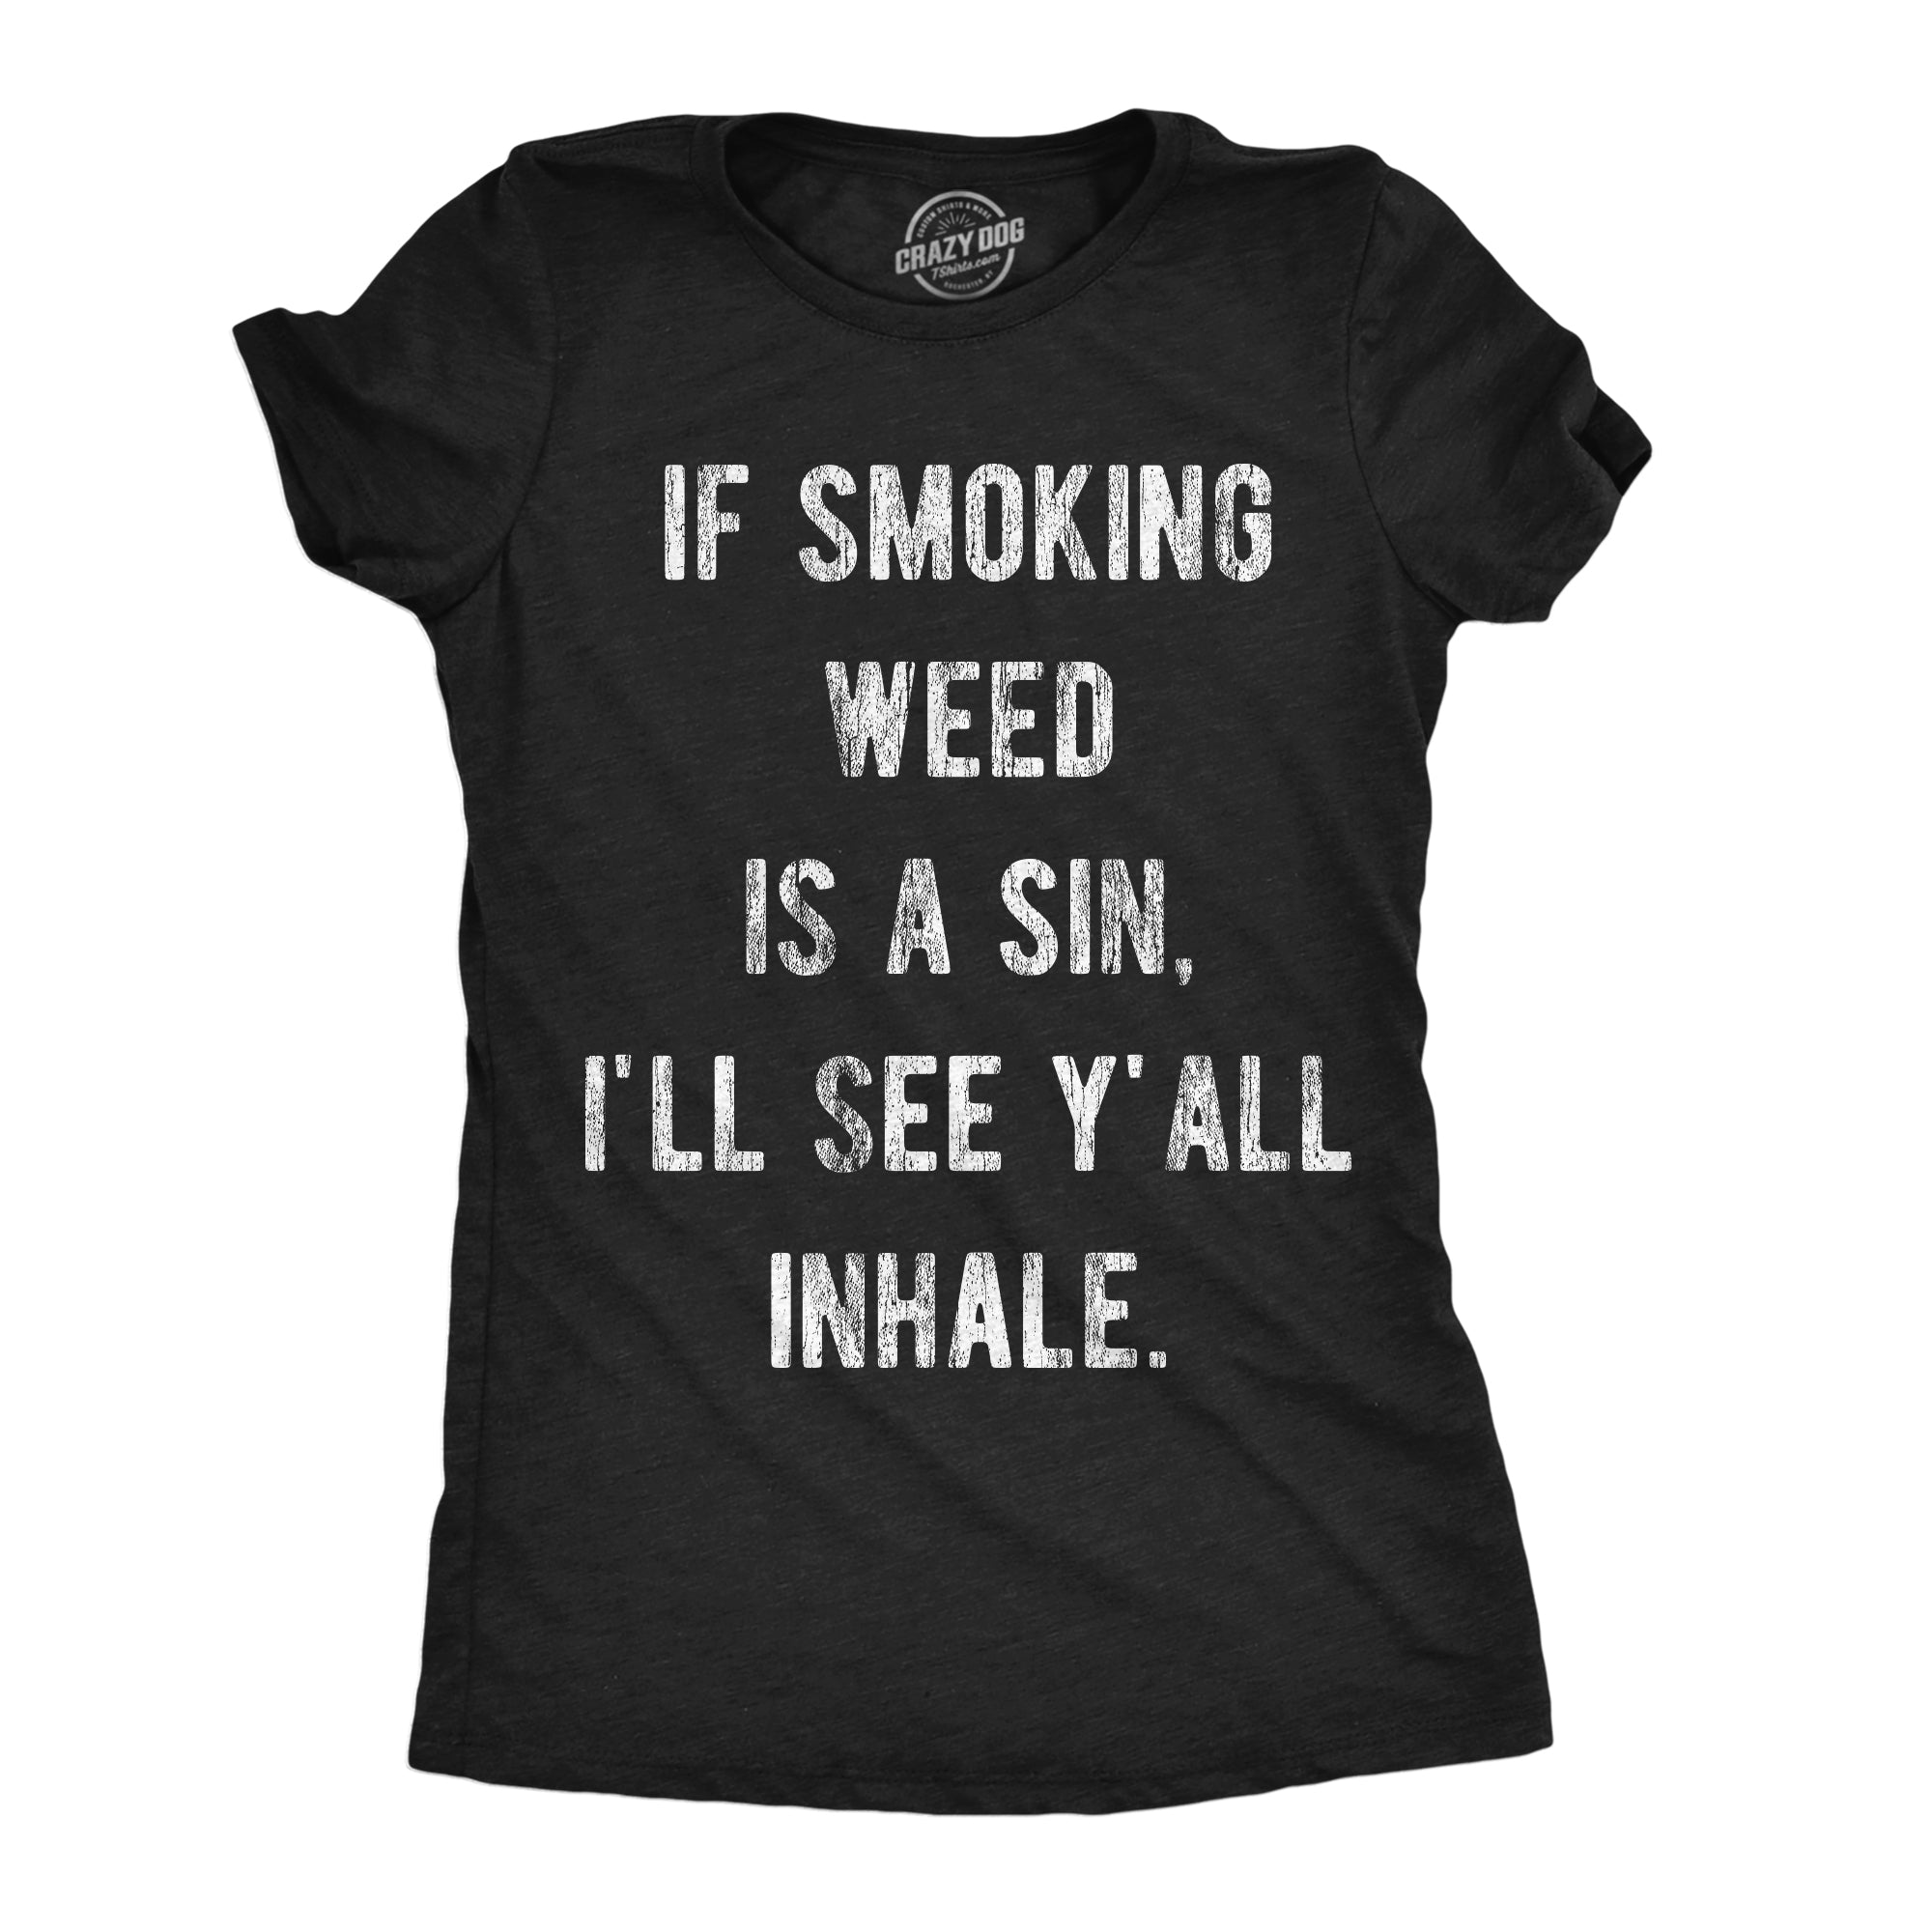 Funny Heather Black - Weed Is A Sin If Smoking Weed Is A Sin Ill See You Inhale Womens T Shirt Nerdy 420 sarcastic Tee